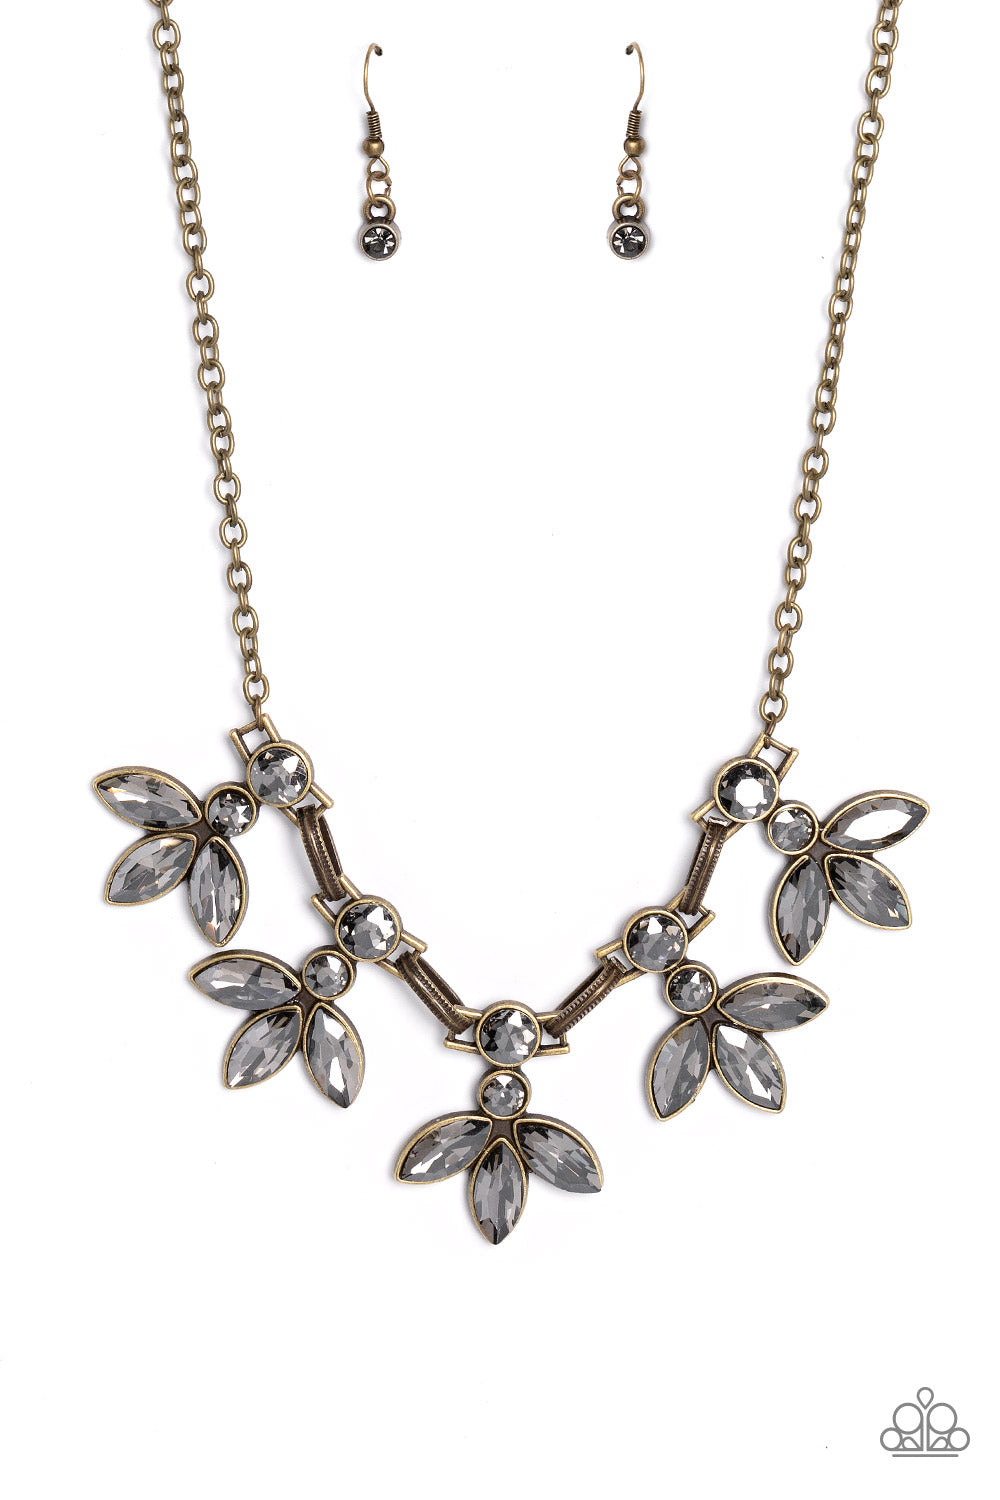 Paparazzi Accessories - Dauntlessly Debonair - Brass EMP 2023 Brass Necklaces featuring smoldering marquise style cuts, oversized smoky gems fan out from an interconnected, circular smoky rhinestone display. Separating the dauntless florals, airy brass ovals, stamped with a dot motif, create additional eye-catching sheen. Features an adjustable clasp closure.  Sold as one individual necklace. Includes one pair of matching earrings.